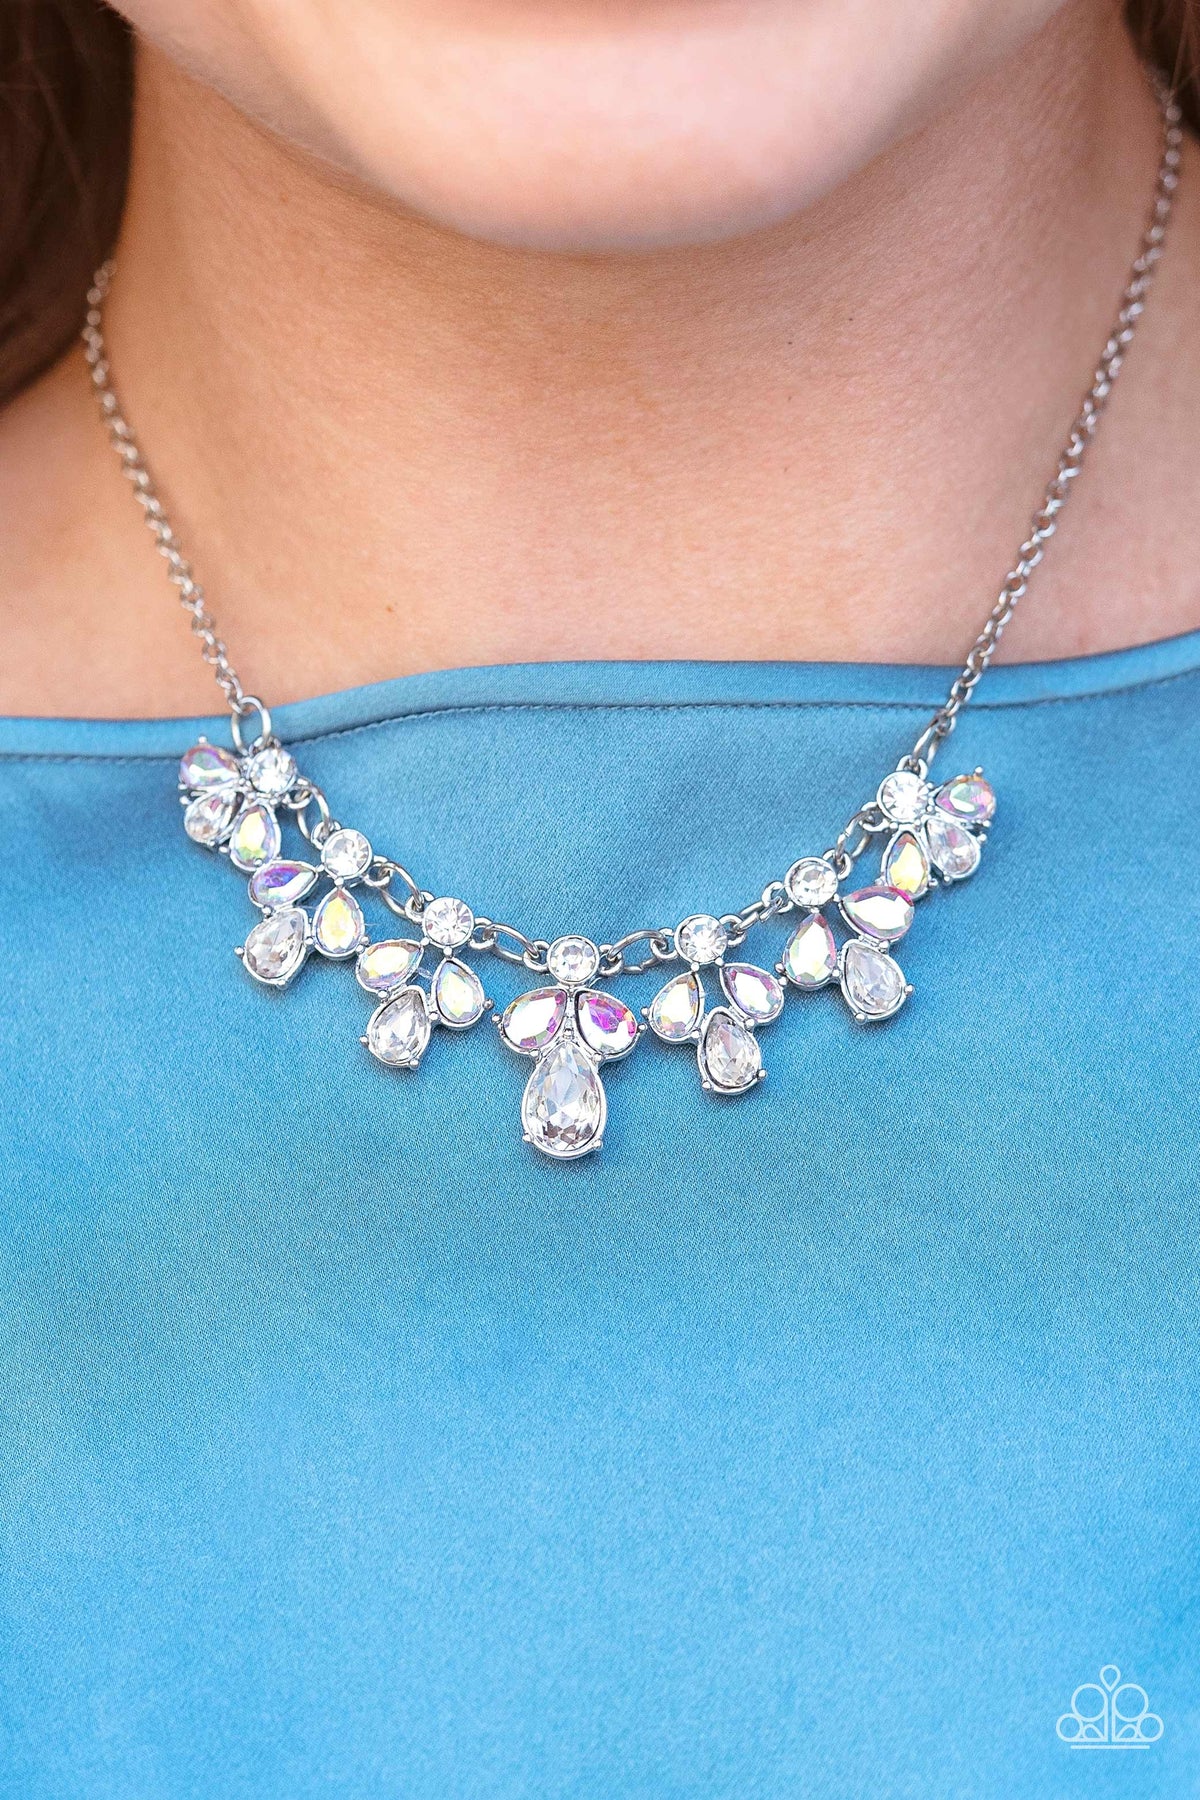 See in a New STARLIGHT White Iridescent Rhinestone Necklace - Paparazzi Accessories-on model - CarasShop.com - $5 Jewelry by Cara Jewels